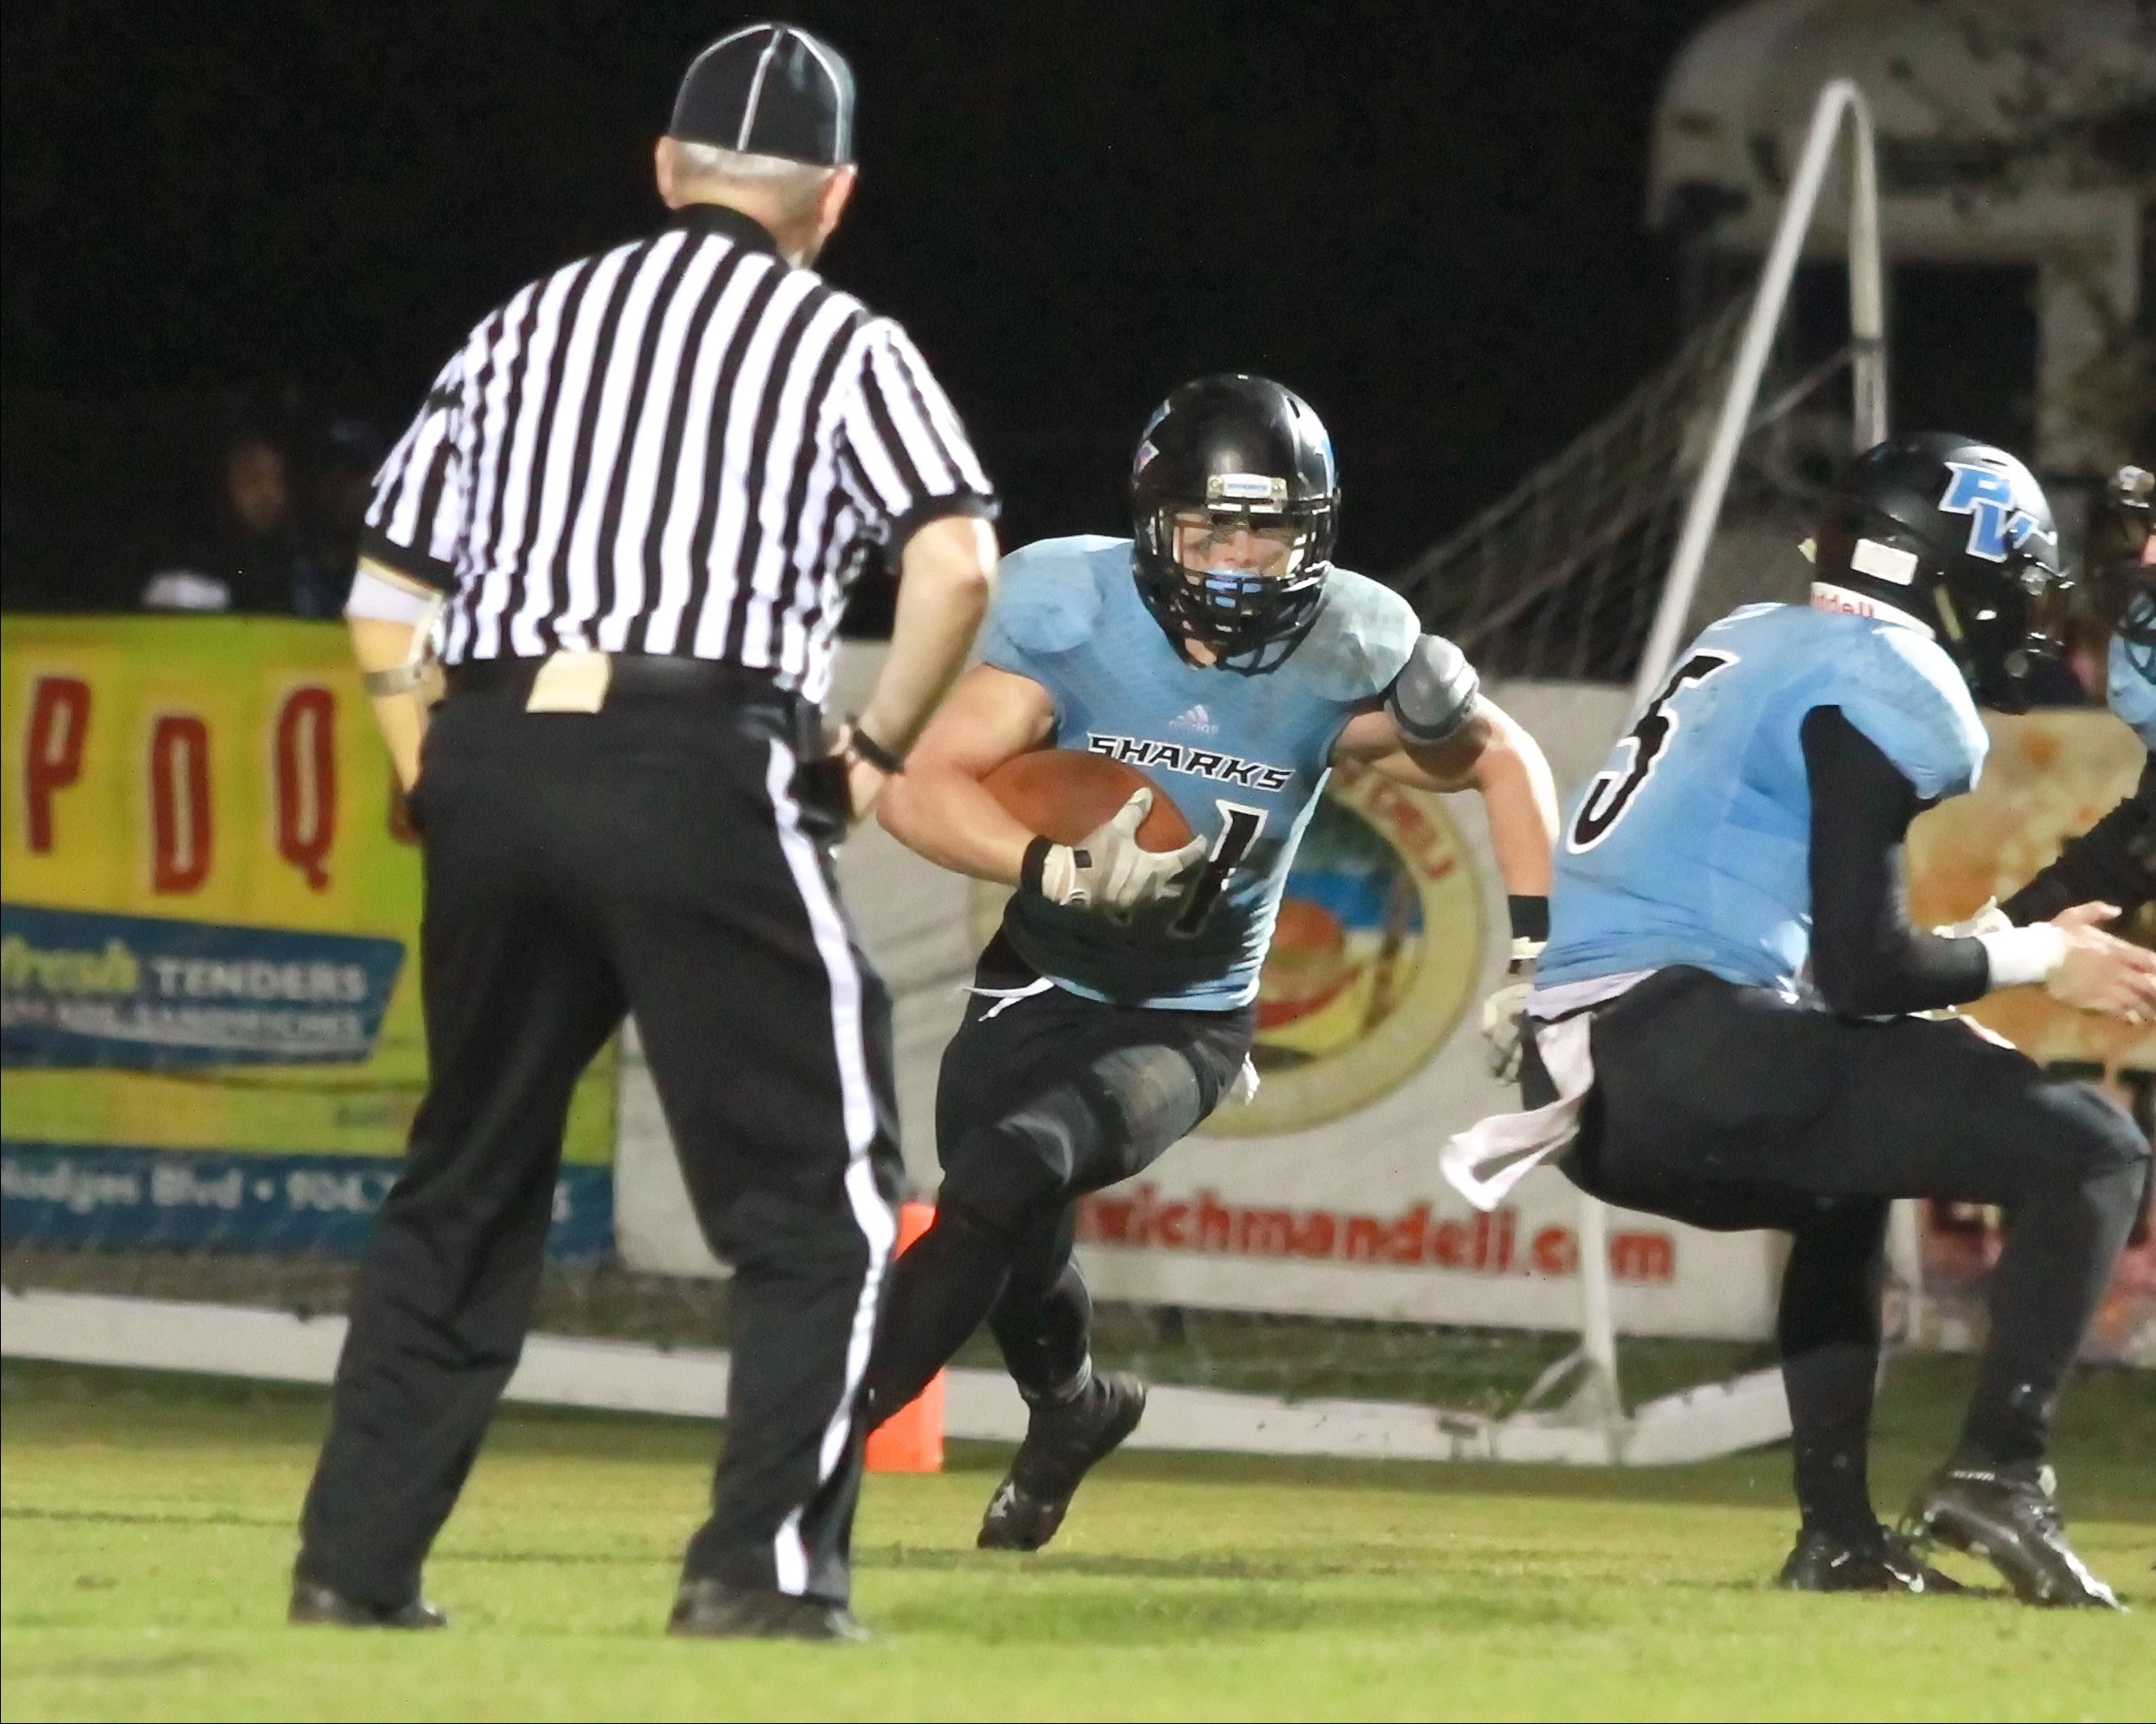 The Sharks’ Andrew O’Dare intercepts a Ribald pass in the end zone.